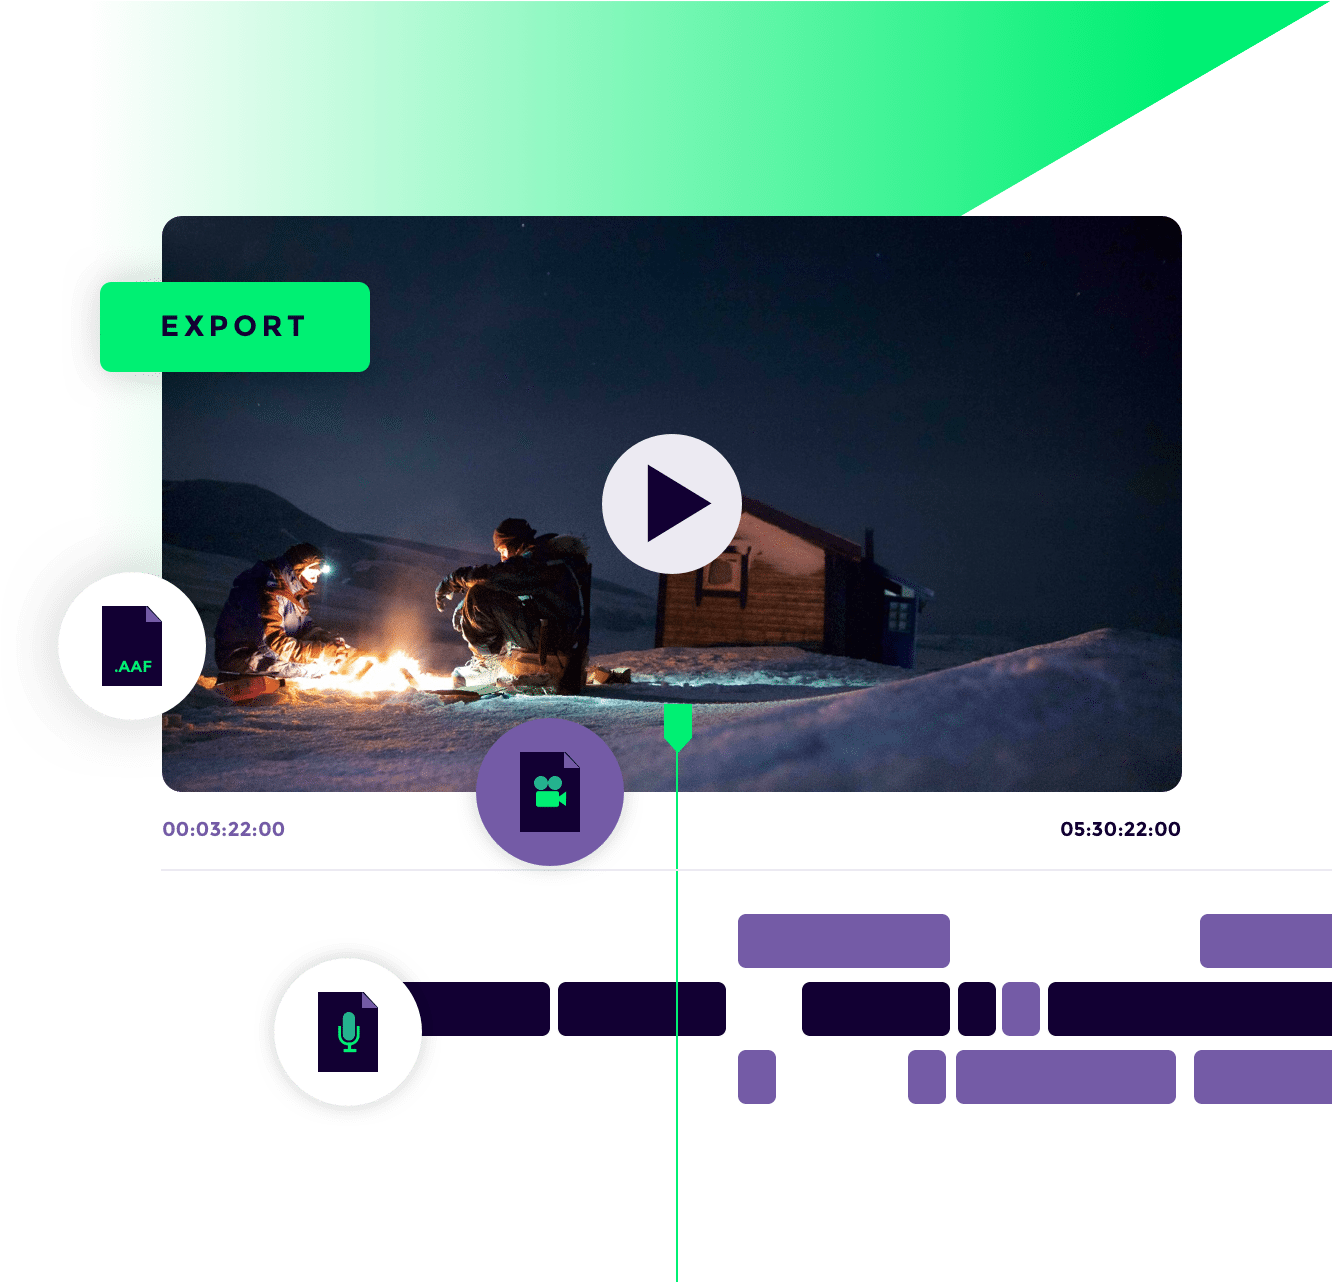 Using Limecraft Flow, you can export collections or shot lists directly onto the timeline of Adobe Premiere or Avid Media Composer